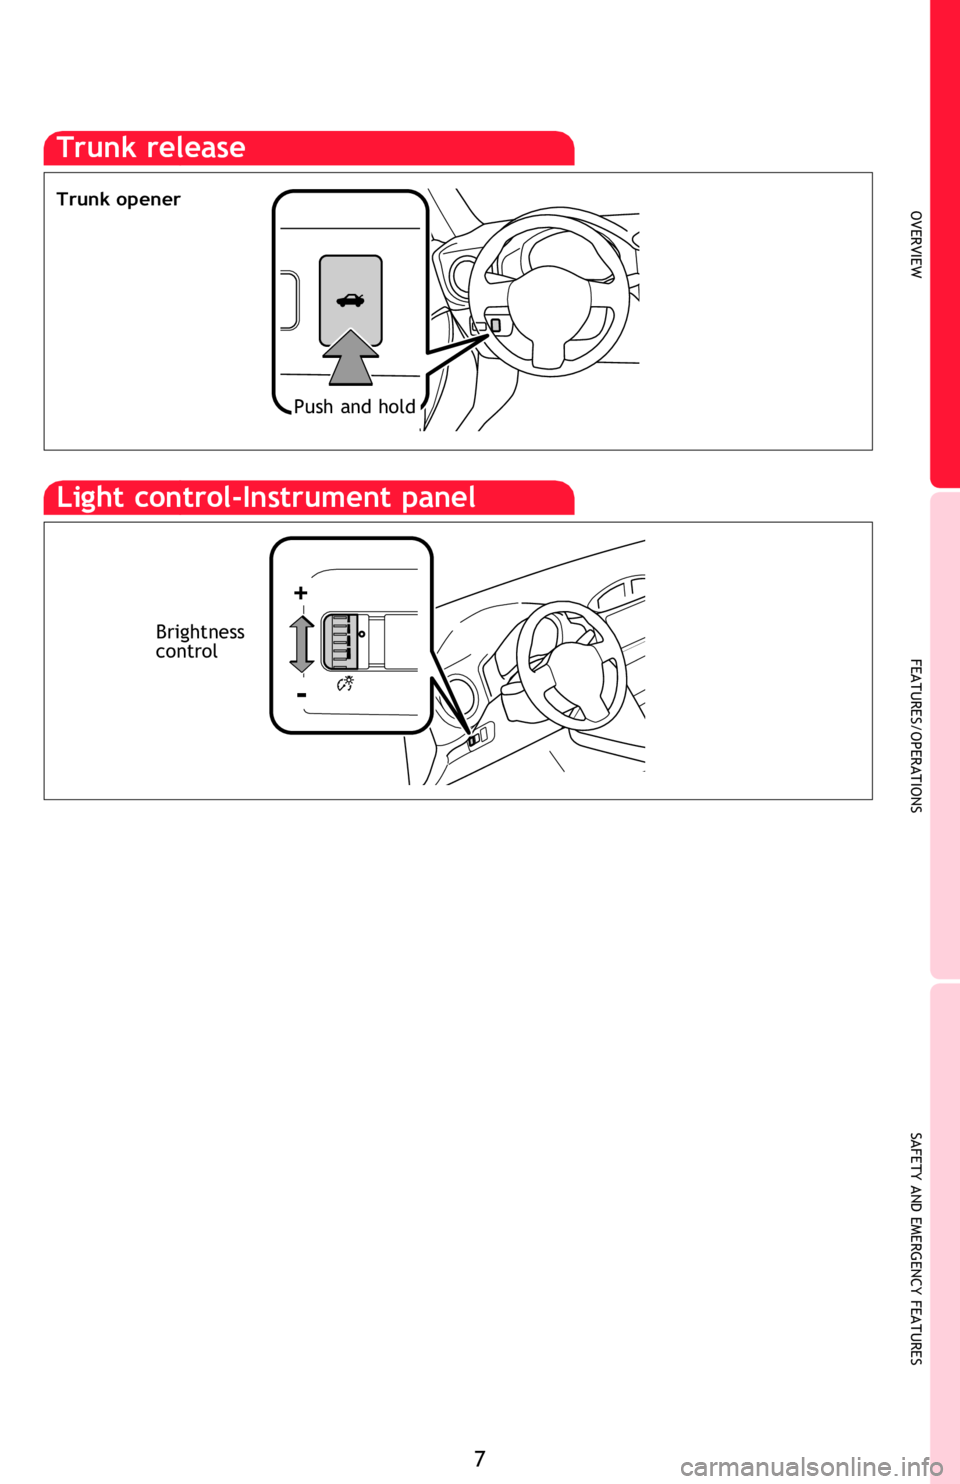 TOYOTA FR-S 2013  Owners Manual (in English) OVERVIEW
FEATURES/OPERATIONS
SAFETY AND EMERGENCY FEATURES
7
Unlocking operation (side door)
NOTE: If a door is not opened within 
60 seconds of unlocking, all doors will 
relock for safety.
NOTE: Tig